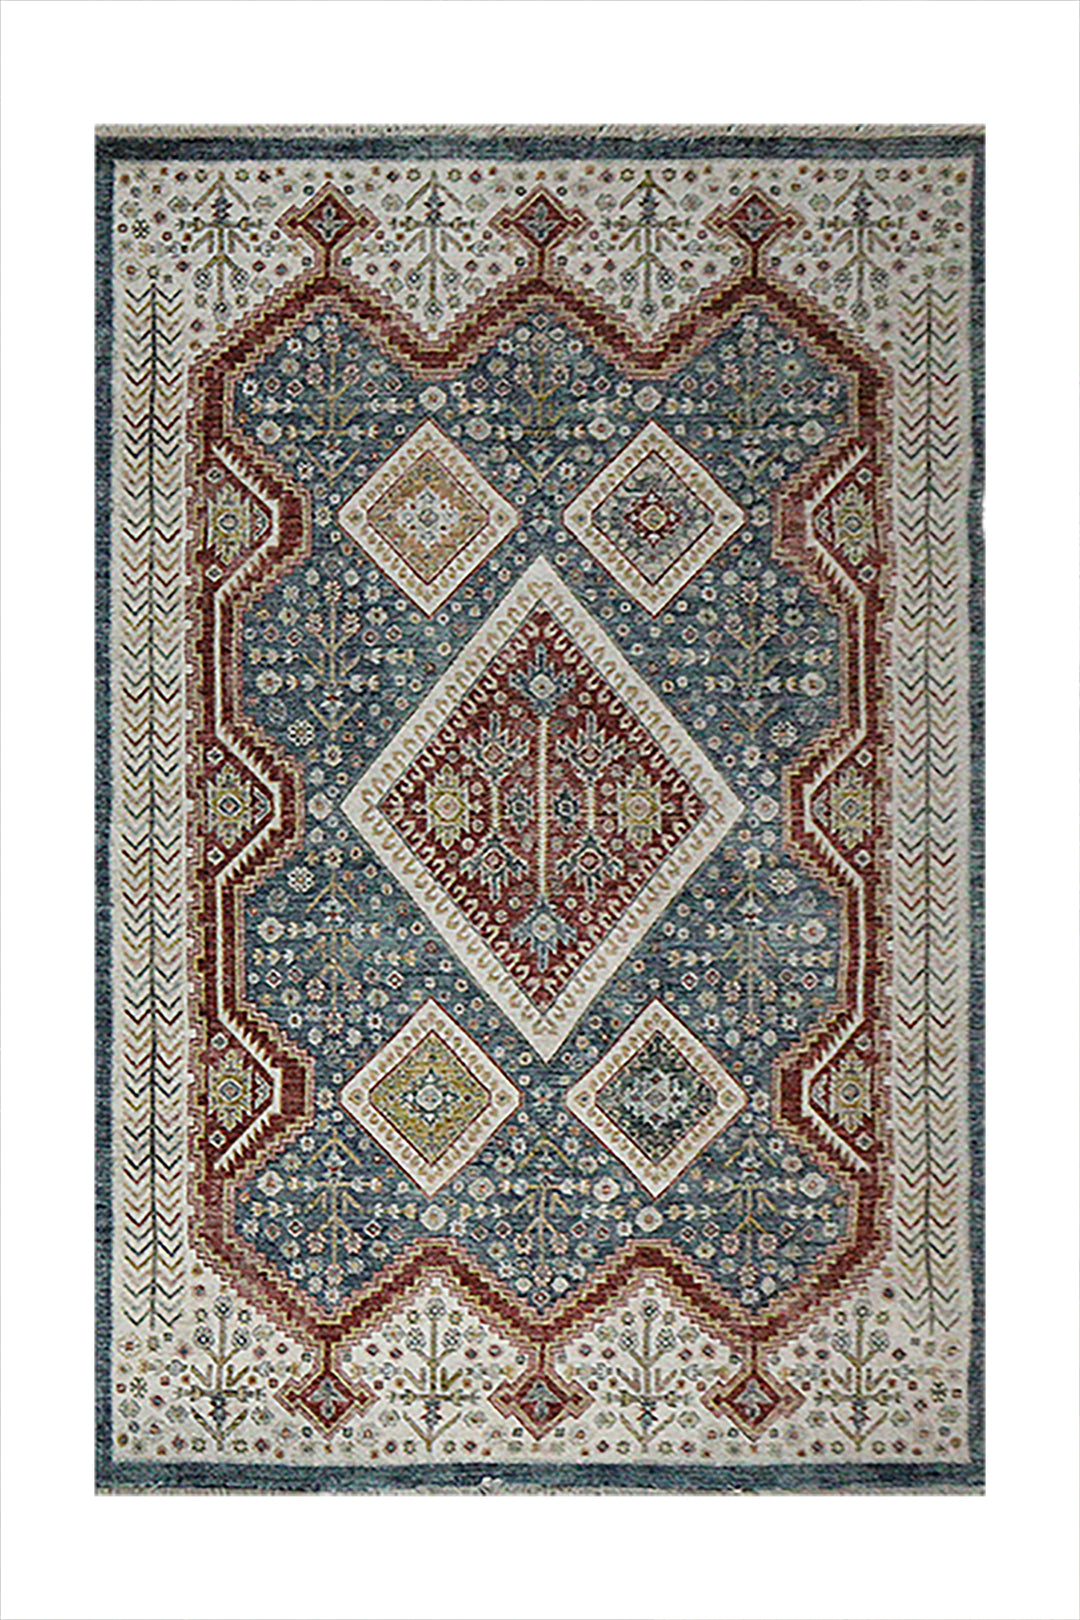 Turkish Modern Festival Plus Rug - 4.9 x 7.5 FT - Blue and Red - Sleek and Minimalist for Chic Interiors